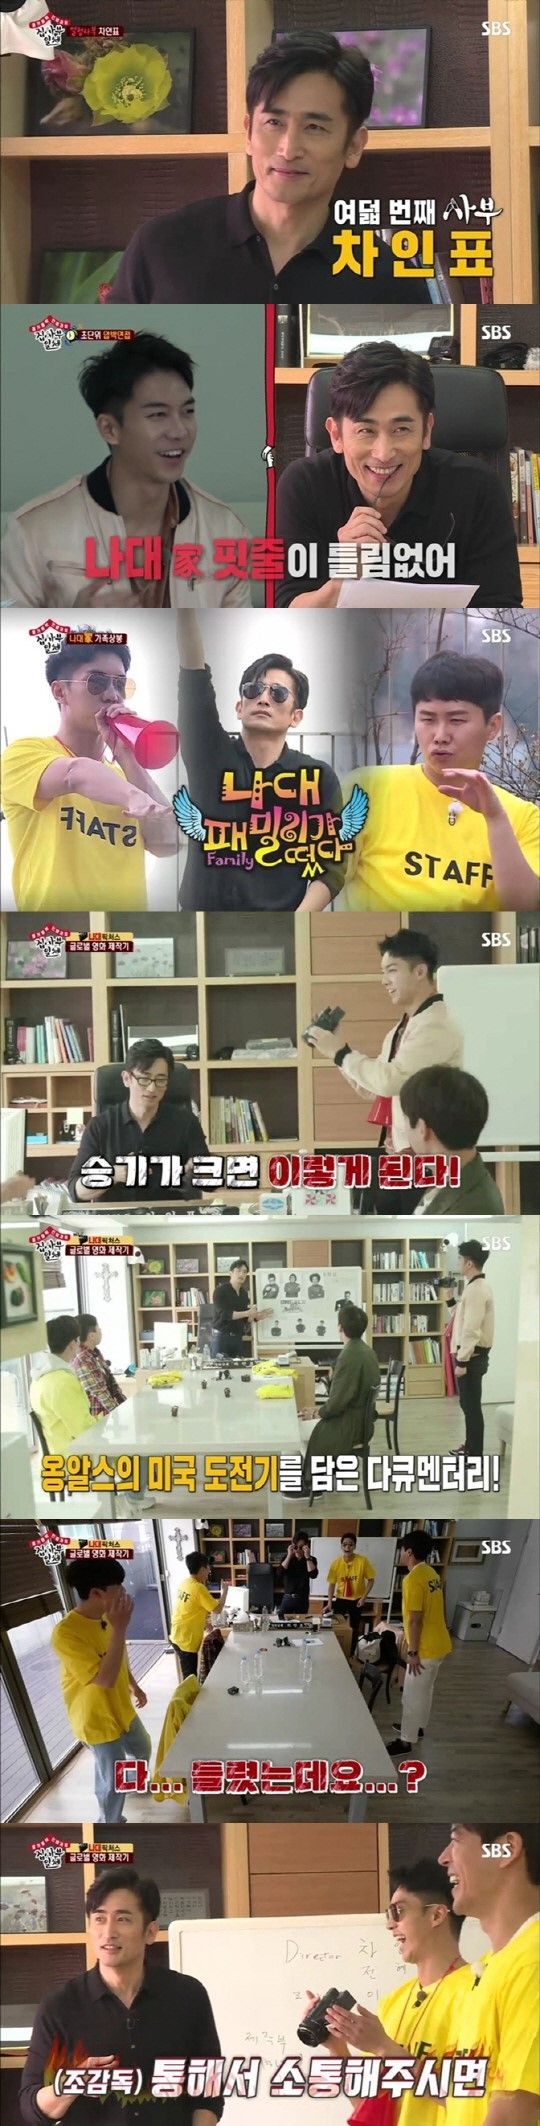 SBS All The Butlers Cha In-pyo and Lee Seung-gi, encounter made by two companies that looks like enthusiasm or standby created birthday laughter.According to Nielsen Korea, the audience rating of SBS All The Butlers broadcasted on the 22nd (afternoon) afternoon is 11.1% (hereinafter referred to as the 2 part of metropolitan area) recorded the number which increased by 1% compared with last week.Also targeted 2049 target audience rating for young viewers between 20 and 49 years old.It is 9%, compared with last week.While 2% will rise, MBC Next Wizard (1.4%) and KBS 2 Happy Sunday (5.0%) and proved the content power of the program with the highest viewer rating of 2049 at the same time zone for 9 consecutive weeks.In All The Butlers of this day, Lee Seung-gi, Lee Sang-yun, encounter of growth material, Yang Se-hyeong and Eight sub-Cha In-pyo was drawn.A member who celebrated Lee Sang-yuns Entertainment debut 100 days arrived at a movie company that found a new sub.Actors Cha In - pyo appeared Saburo in front of the members who finished making their resume based on the message placed in the office.Cha In-pyo who appeared with the video camera became my own film director.I am filming a movie now, he introduced his confidence.Cherish the directors name tag Following the appearance of Self-Made Director Cha In-pyo, a pressing interview of seconds was started for his own right arm to overtake Assistant Director Assistant Director.Unlike intense eyes full of charisma, Cha In-pyo caught a maze laugh per reversing ho.Lee Sang-yun, who has less experience in film appearance than a drama when he sees a short concentration force that can not exceed 10 seconds during an interview, I will often choose a scenario.There are not many representative works I have been doing a lot, advising them and bursting everyone to burst into a self-discipling.Passionate Sub From Cha In-pyo Lady Seung-gi, Yang Se-hyeong that communicates with Nadem I also heard the gene.Cha In-pyo said that Character is similar to myself by protecting Lee Seung-gi who wraps up Yang Se-hyeongs mistake, It is acceptable if it says better, but Nadenun is badly said.There was something obvious that Nadeda was humiliated.A friend came kanning at the middle school when he was a group leader.For the sense of responsibility I decided that I wanted to match the stick 100 instead, said W - Before - Nine Lee Seung - gi expressive torque.